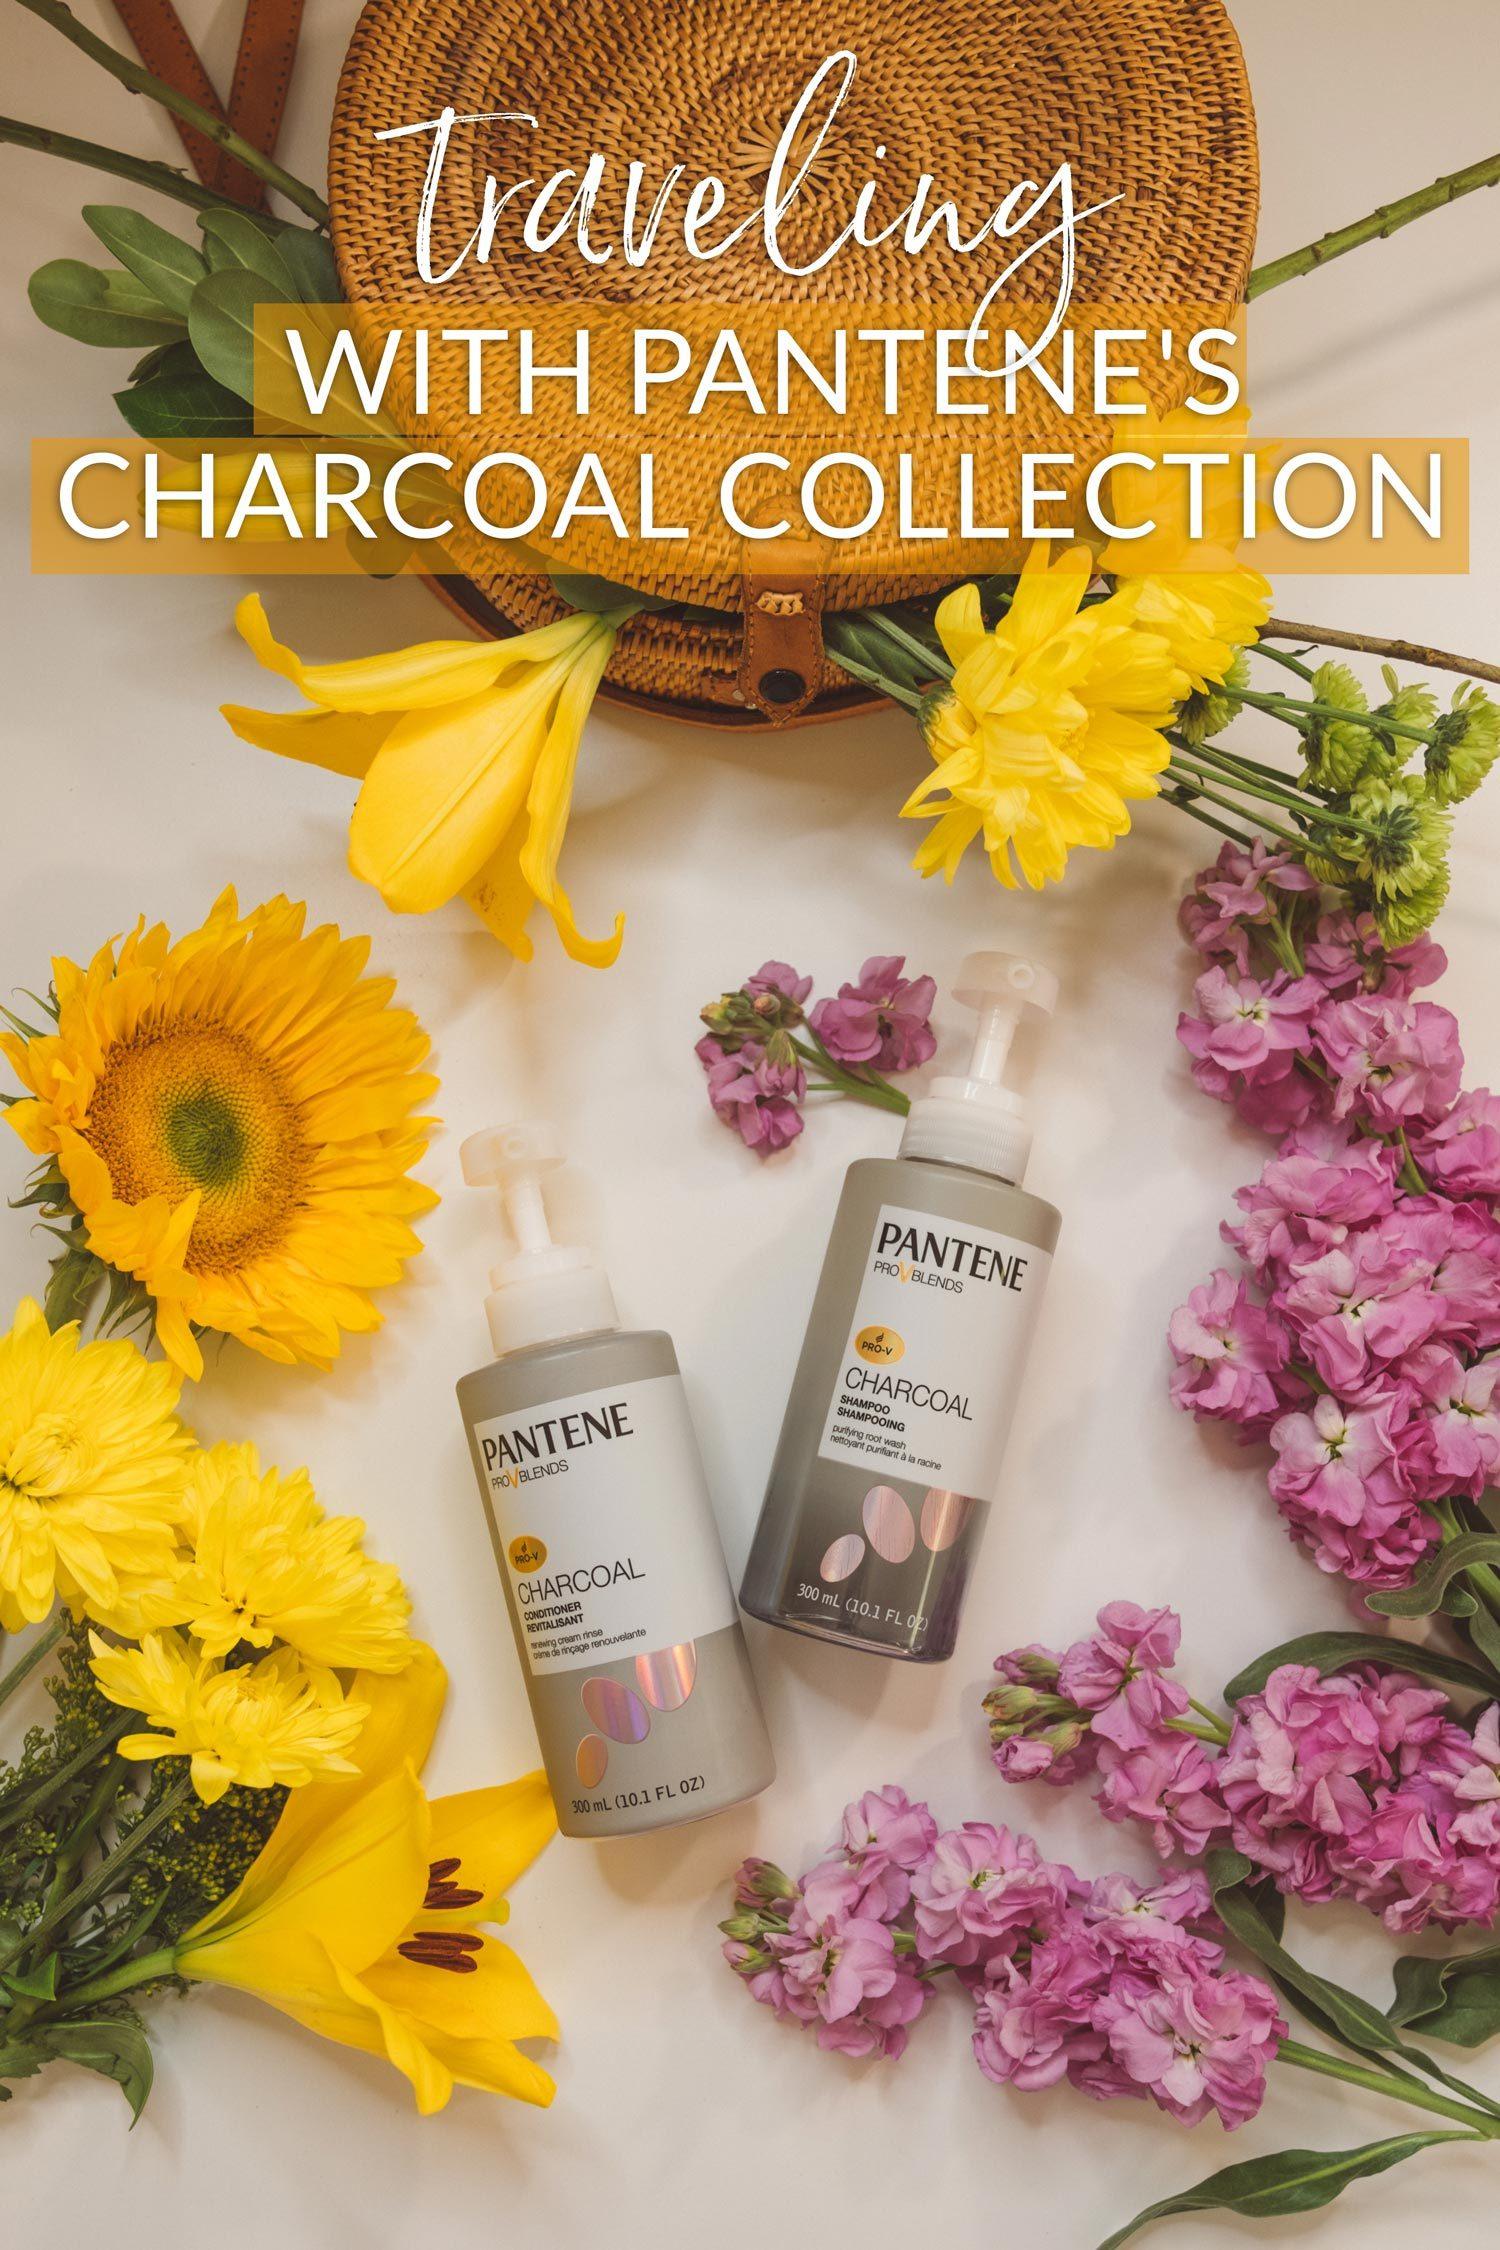 Traveling with Pantene's Charcoal Collection